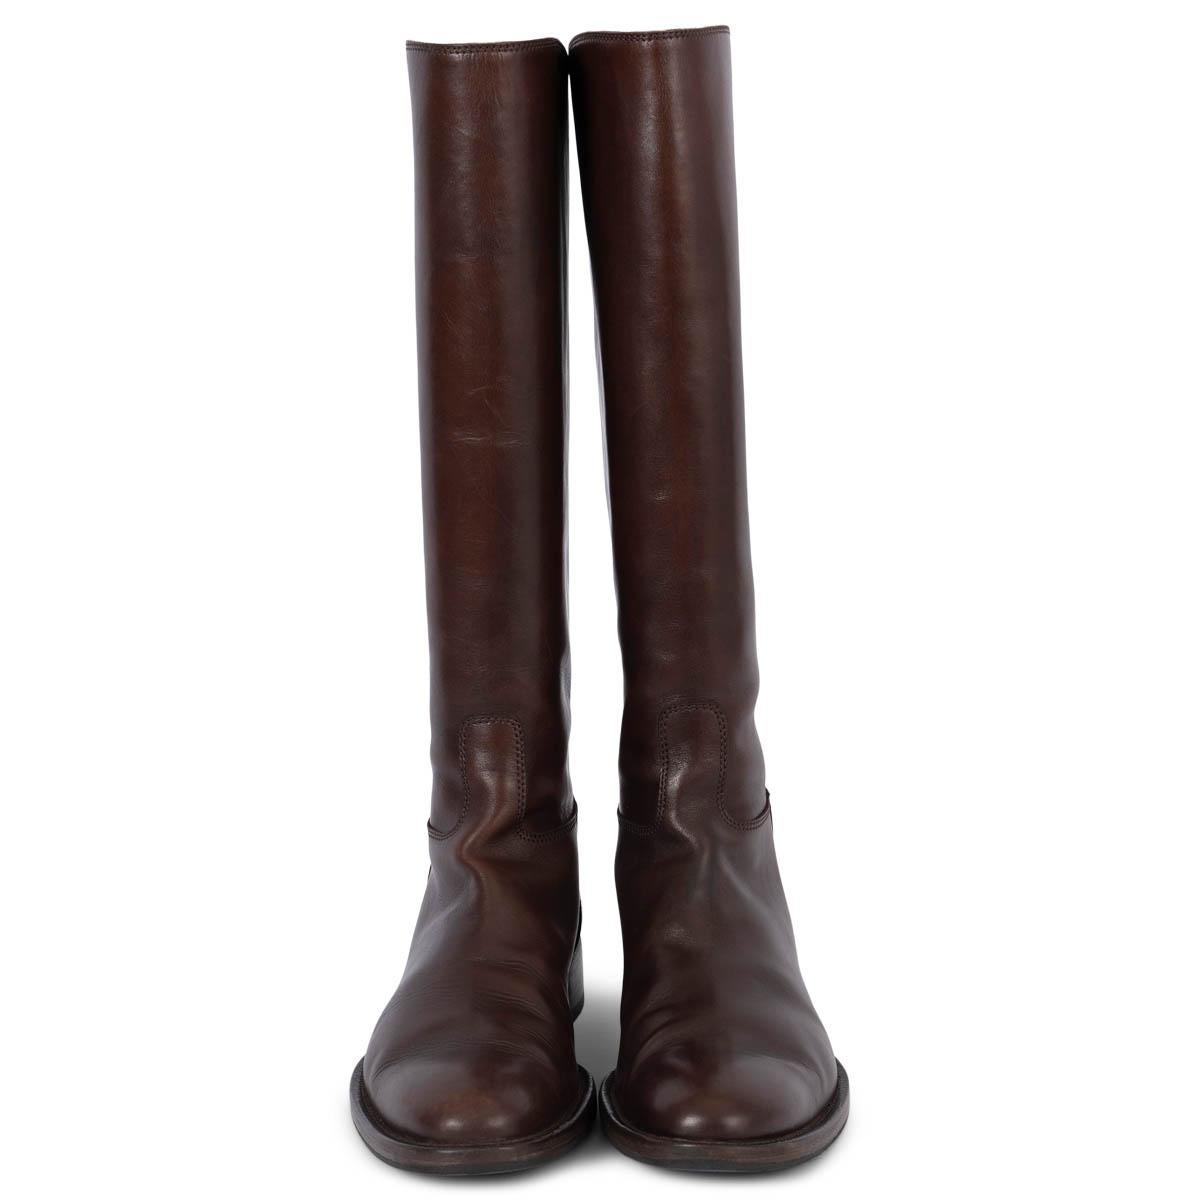 100% authentic Loro Piana Wellington riding boots in chestnut smooth calfskin. The design features a knee-high silhouette and zipped back. Have been worn and shows some faint patina and creasing to the leather. Overall in very good condition. Rubber